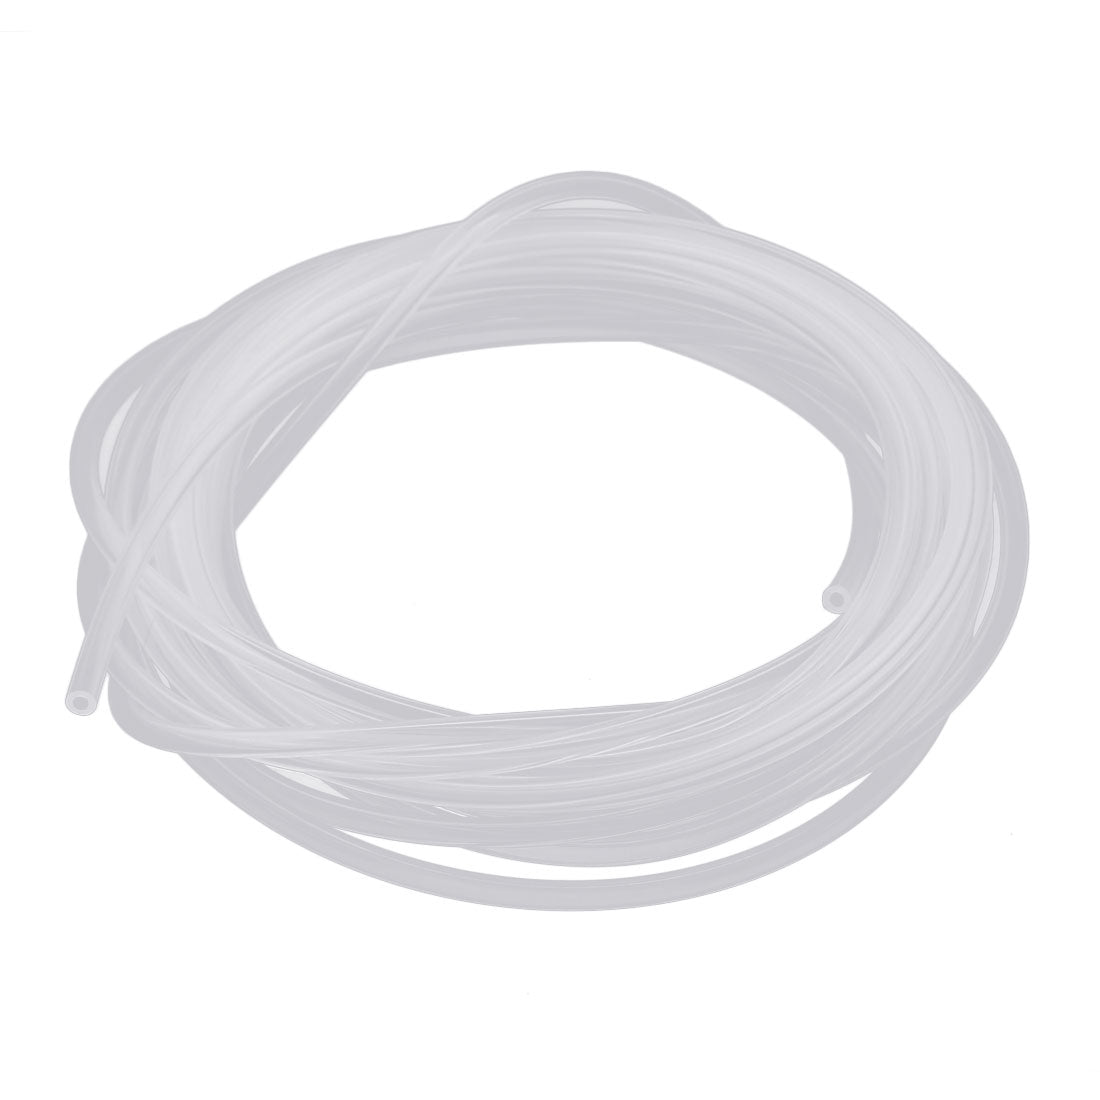 uxcell Uxcell 2mmx4mm PTFE High Temperature Transparent Tubing 2 Meters 6.6Ft for Electronics